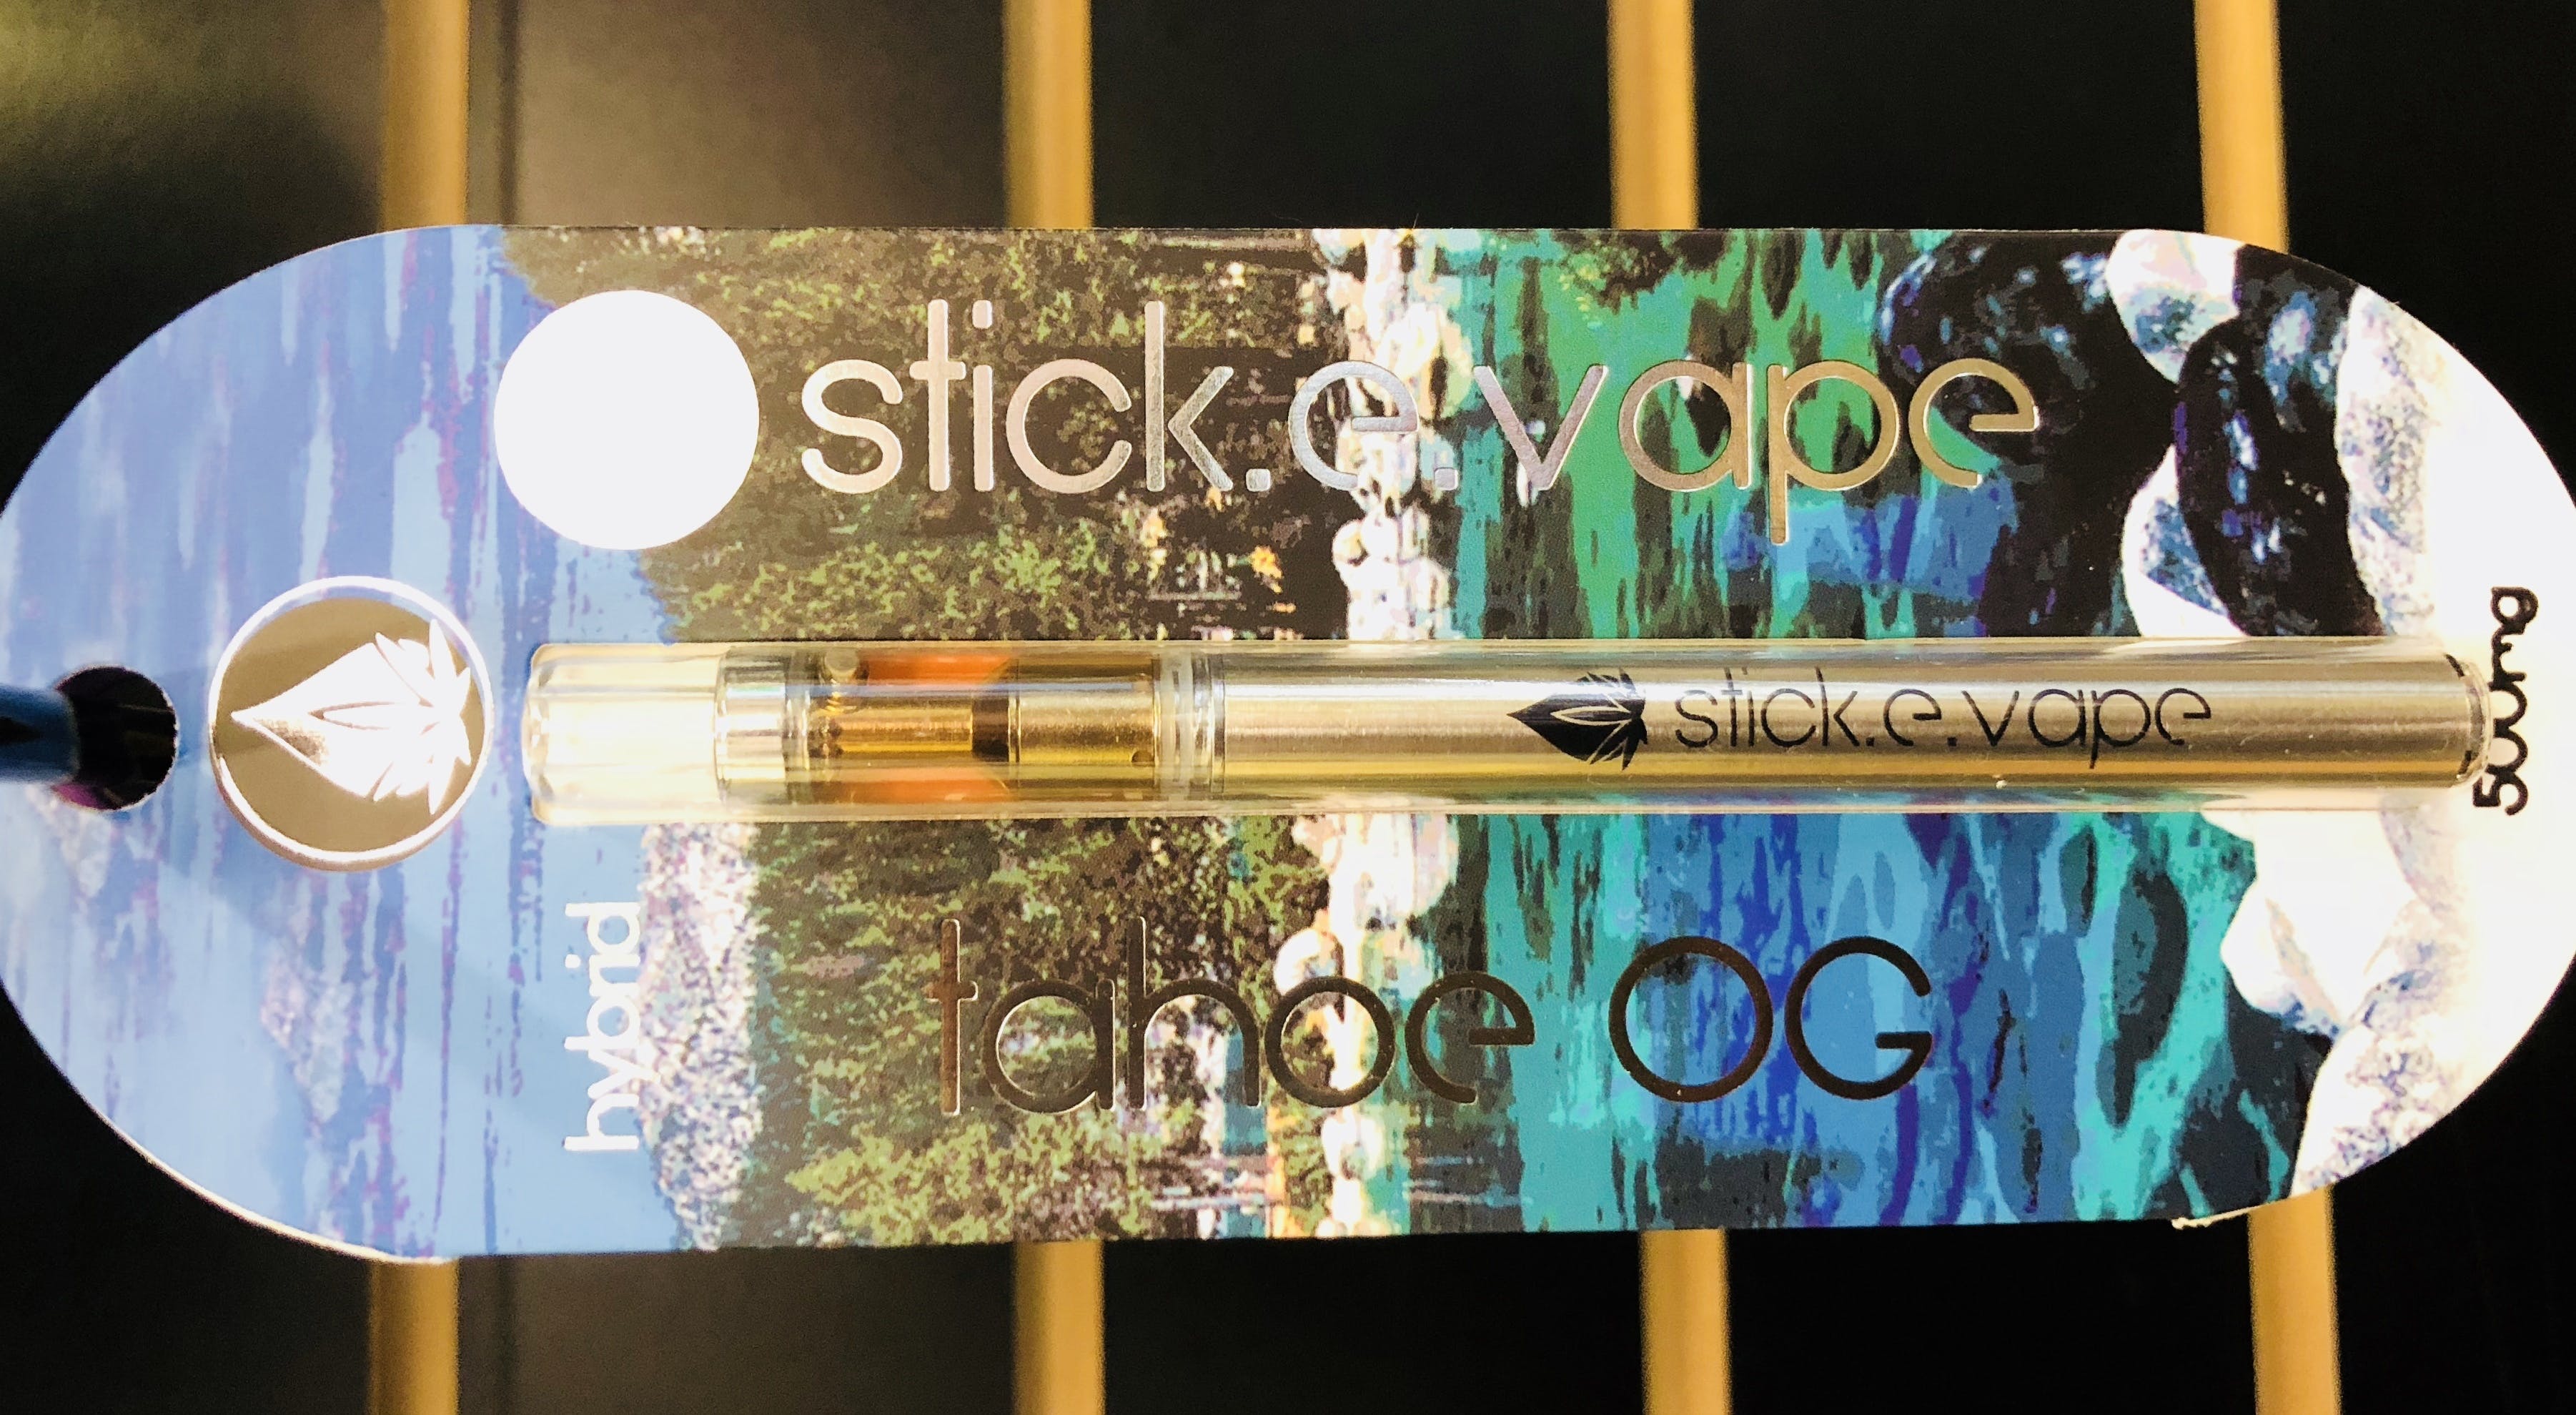 concentrate-stick-e-vape-tahoe-500mg-disposable